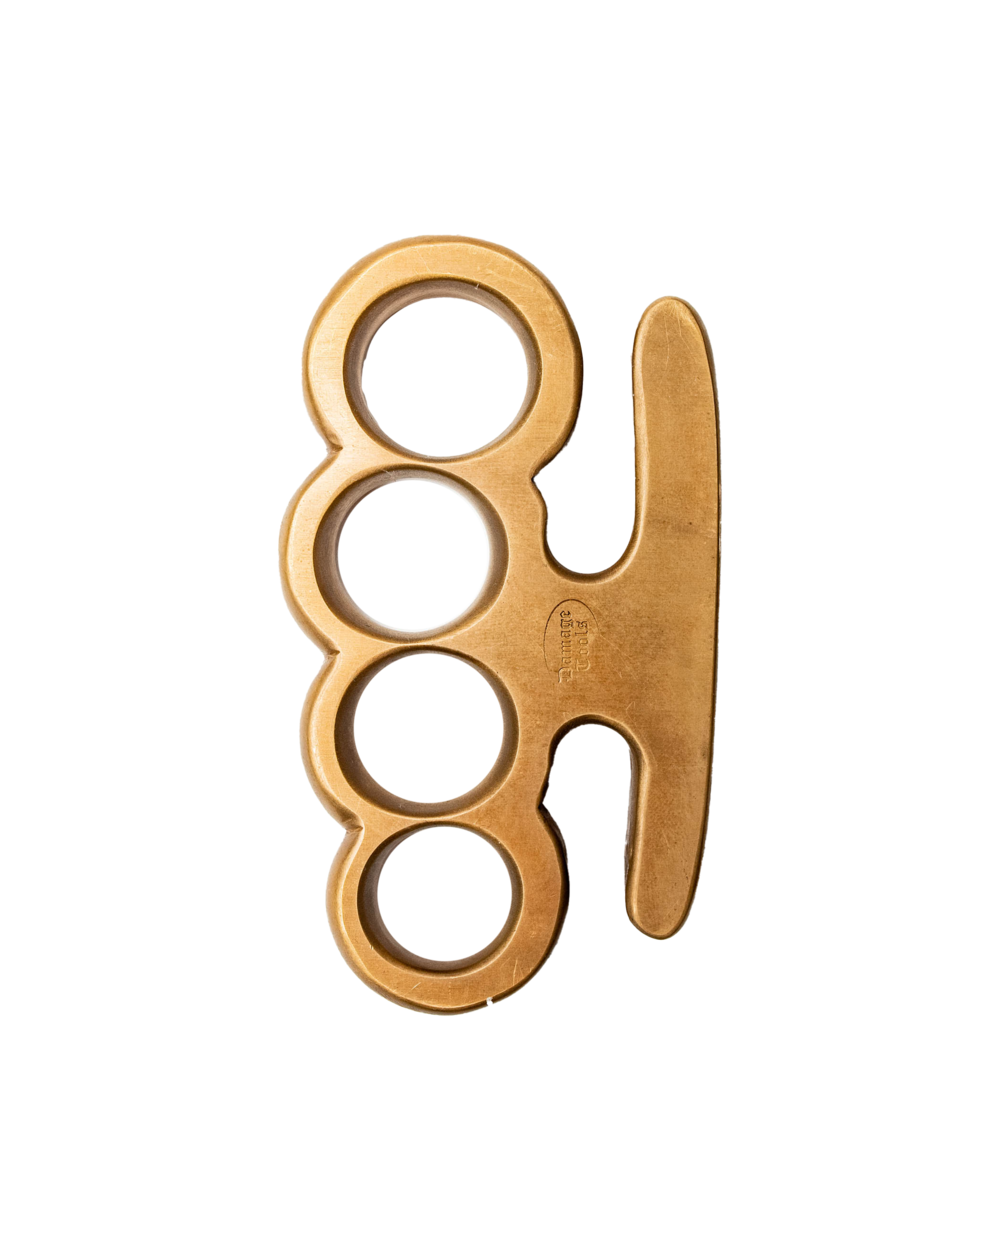 http://1924.us/cdn/shop/products/1924us-brass-knuckles-duster-art_7308c764-fc6a-4d7d-9832-c13b0be8829d.png?v=1679349579